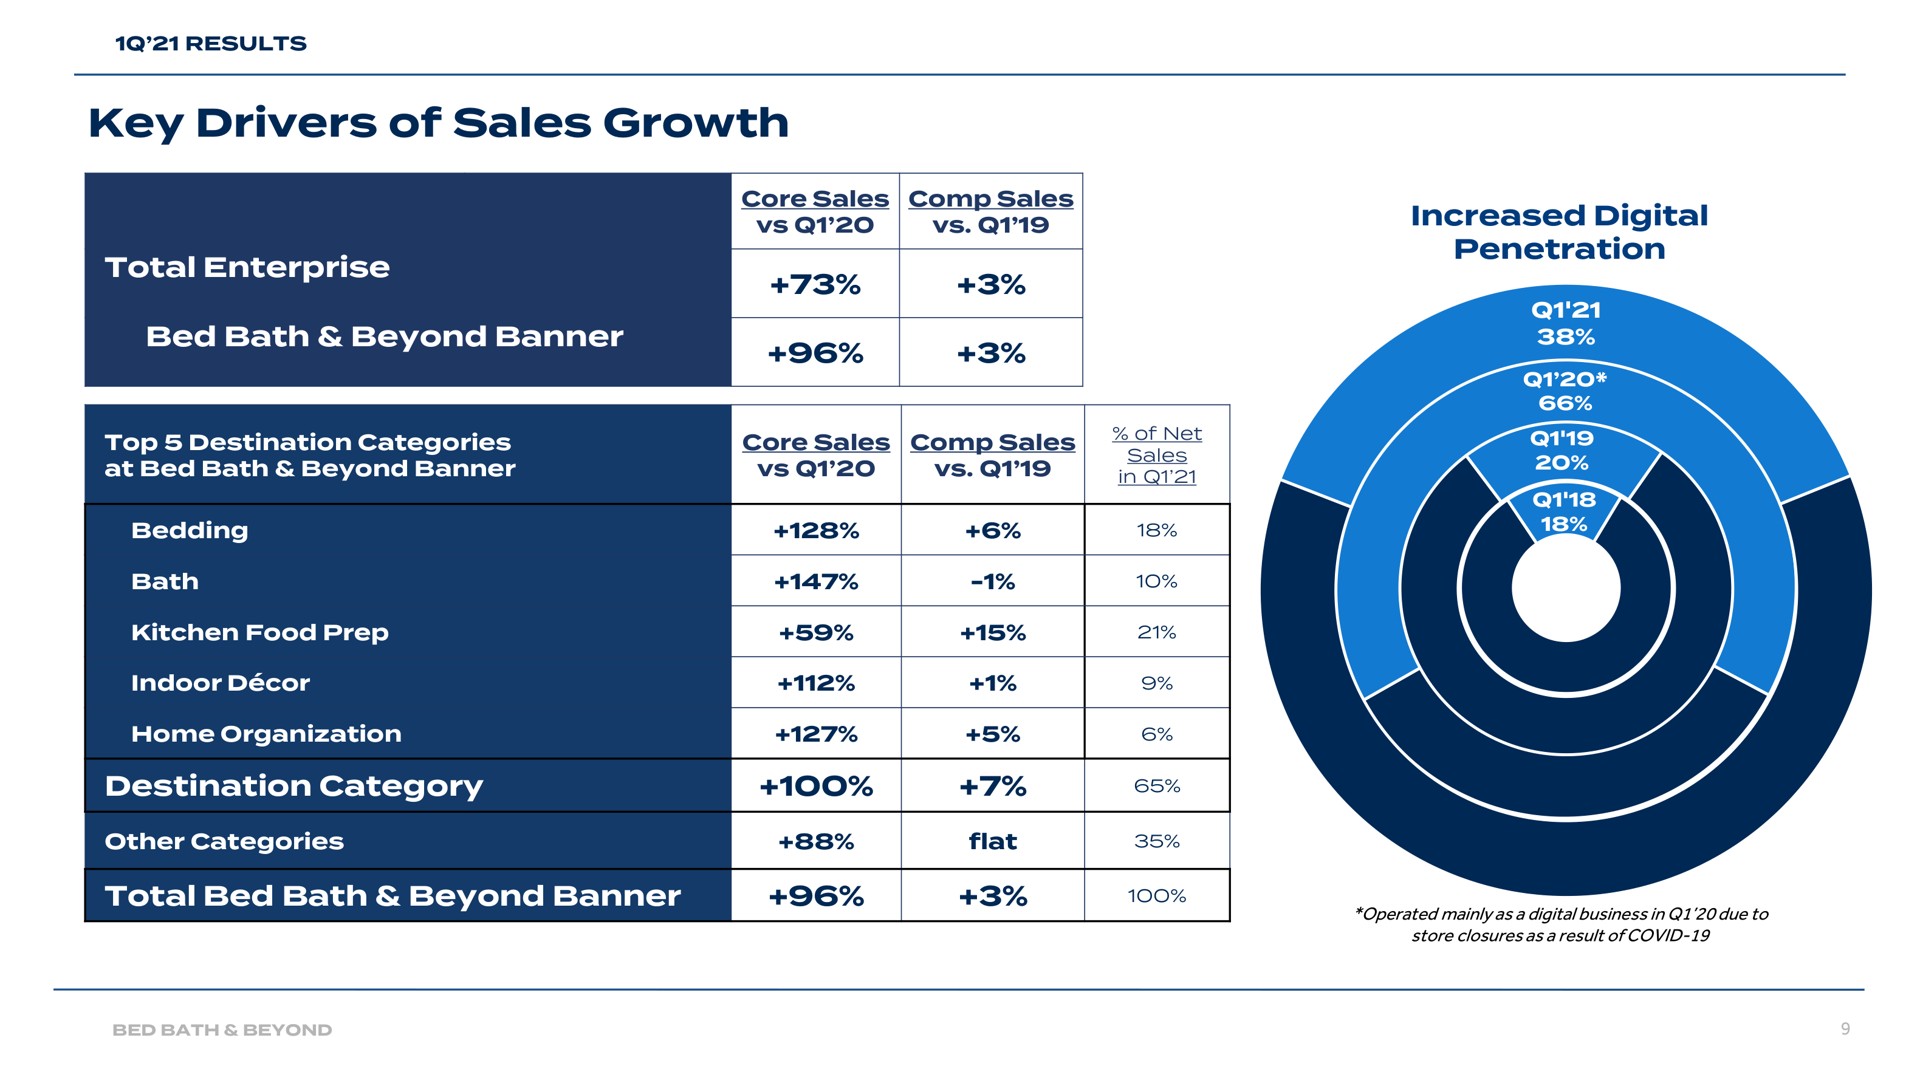 key drivers of sales growth total bed bath beyond banner | Bed Bath & Beyond